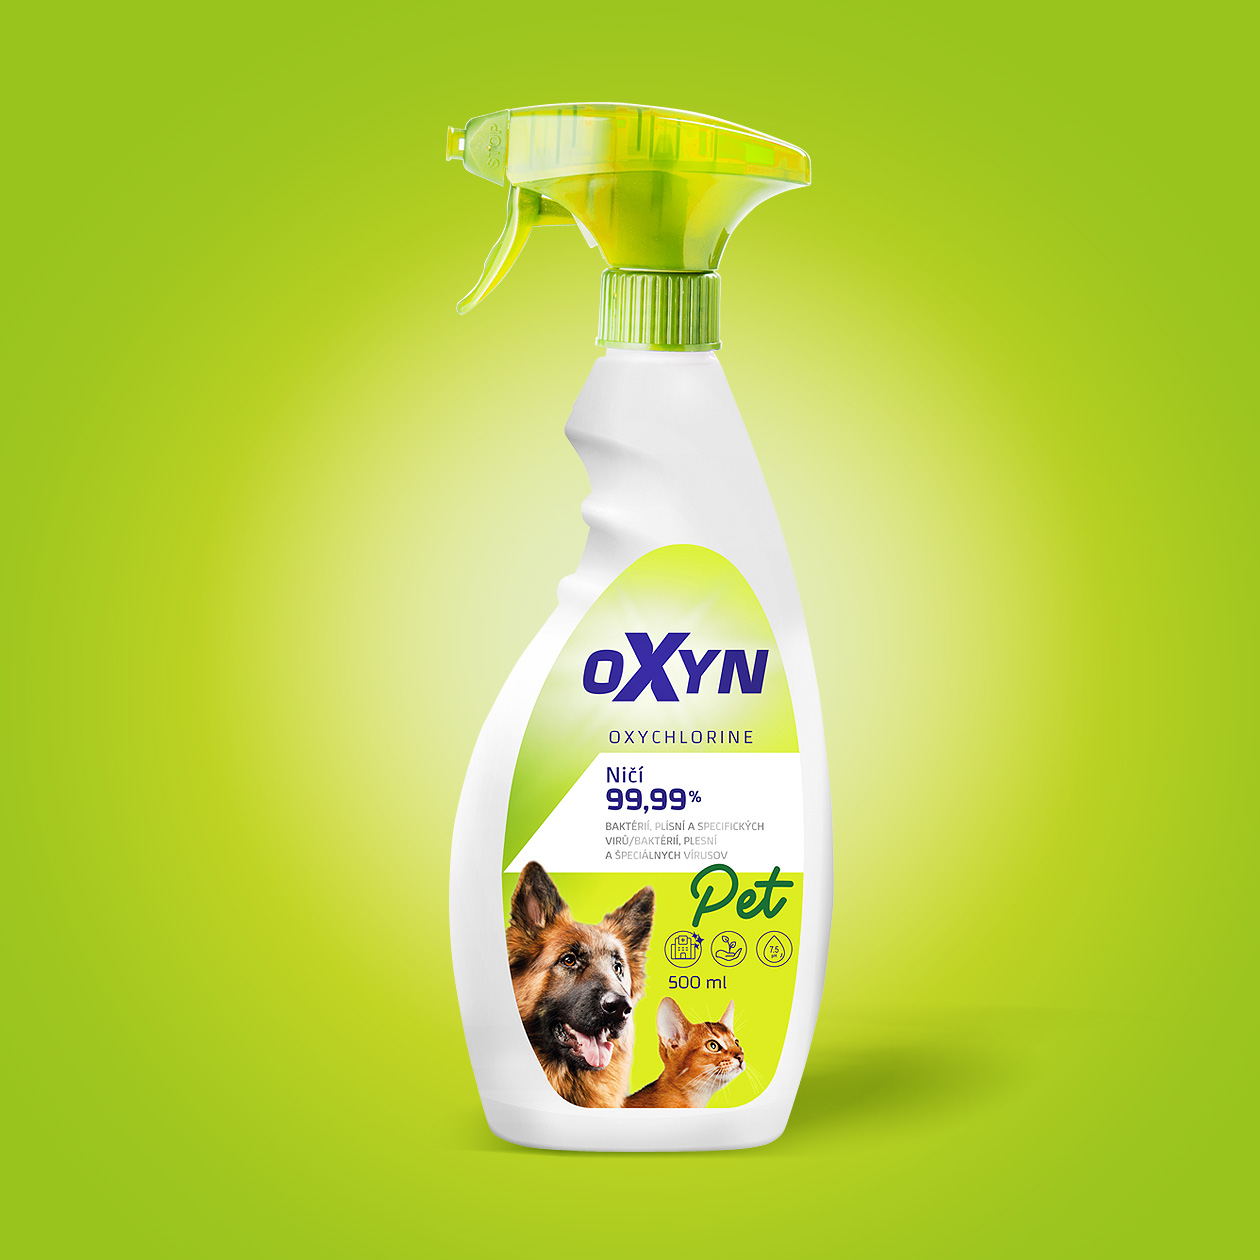 packaging oxyn veterinary cleaner